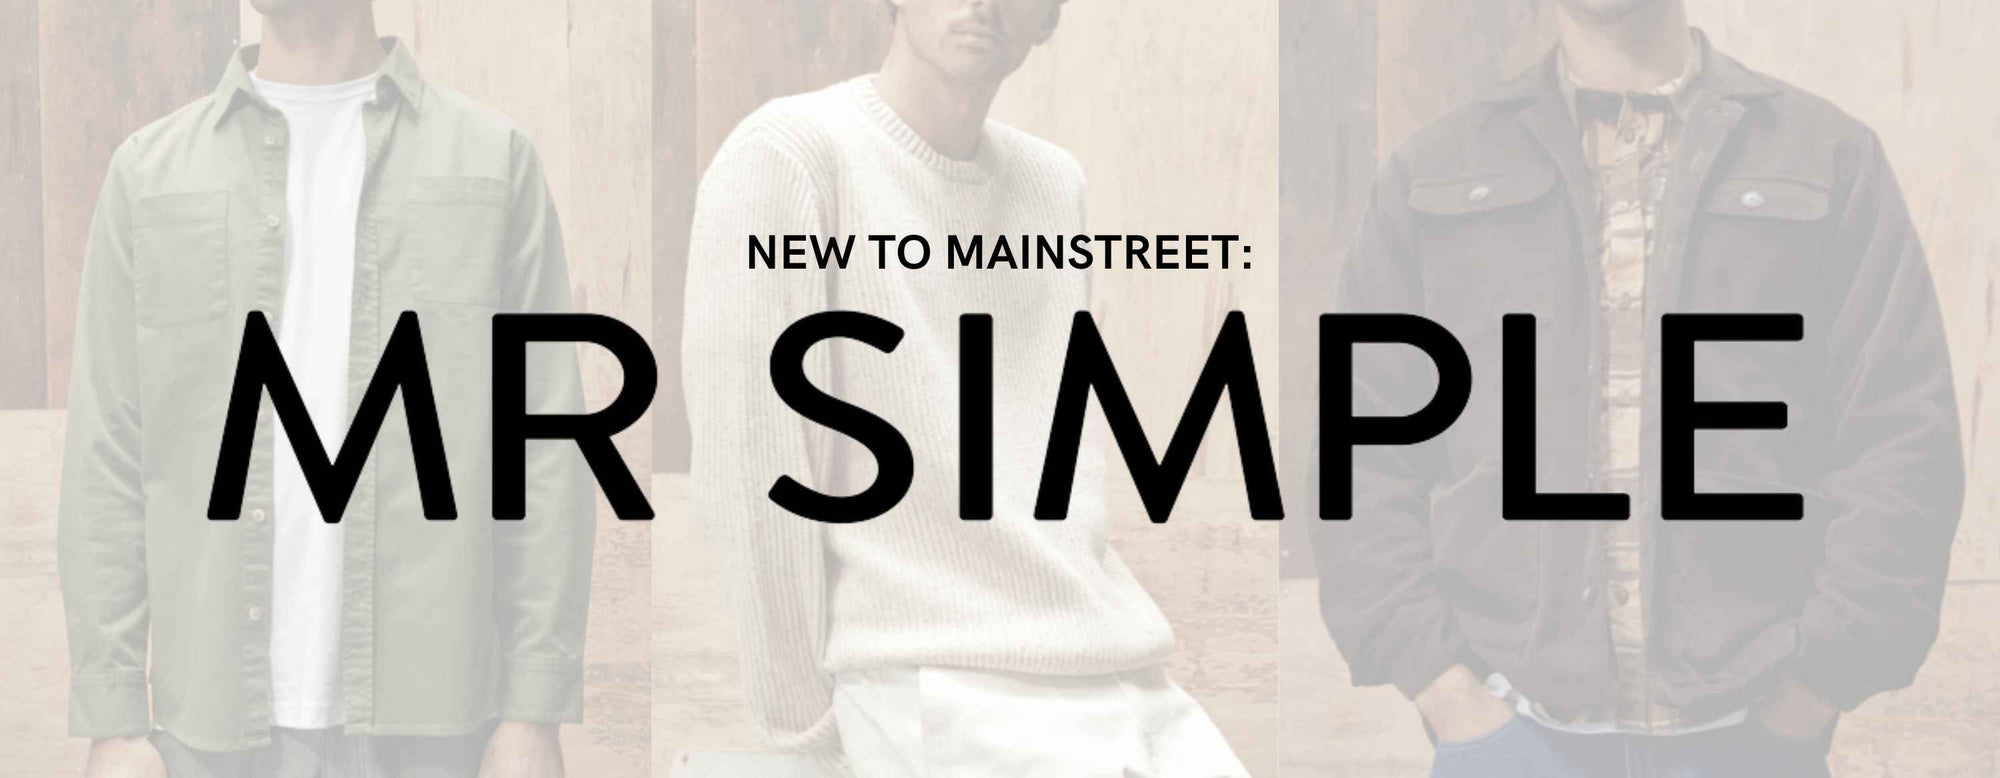 New to Mainstreet: MR SIMPLE